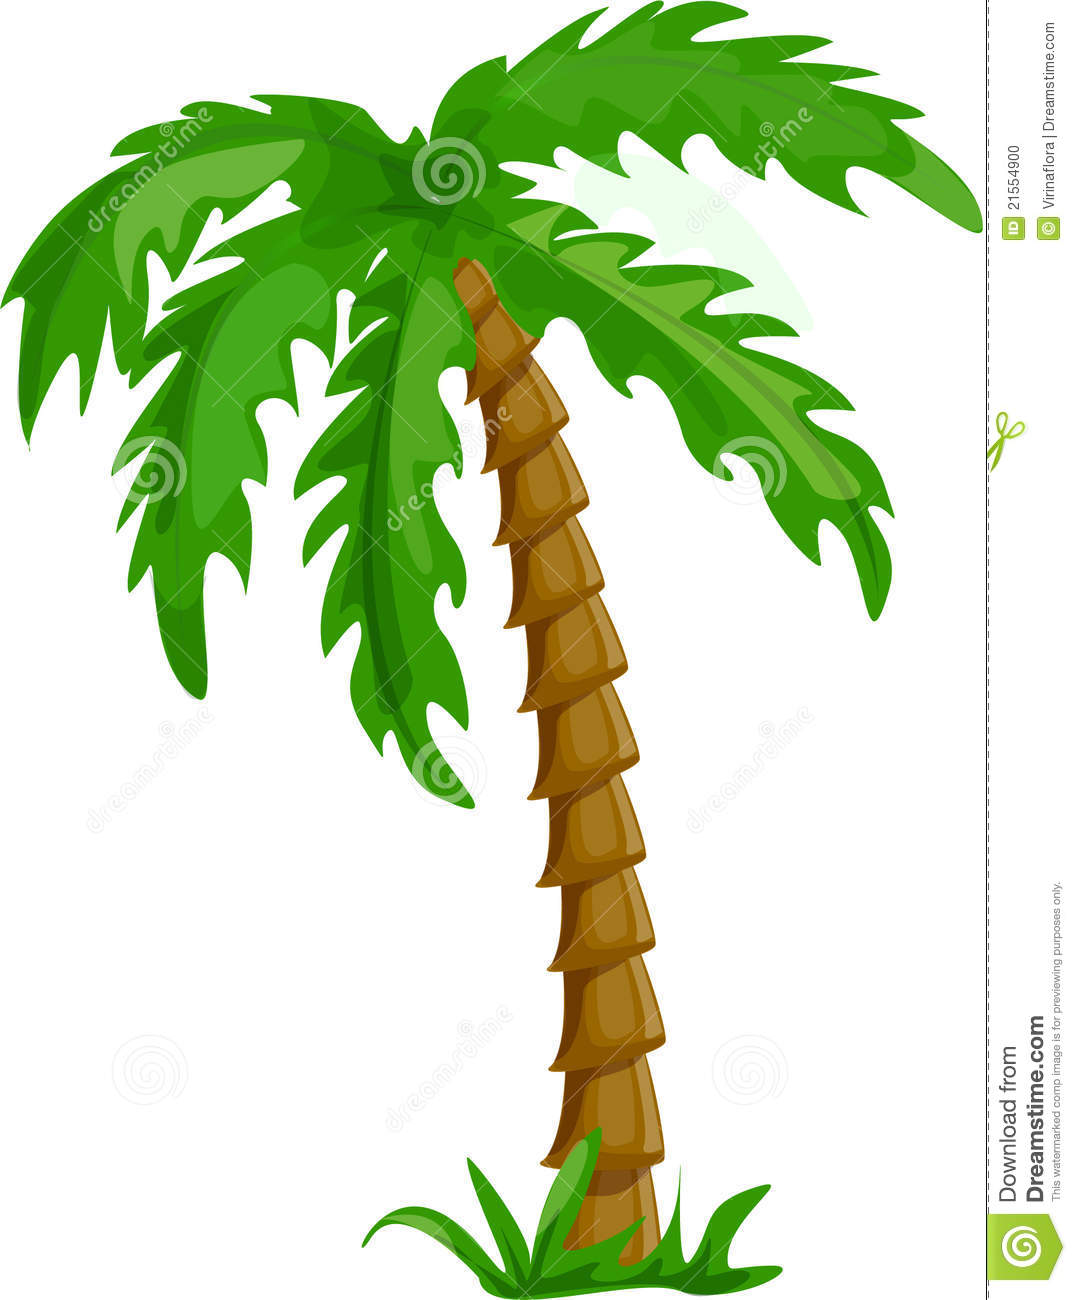 Clip Art Palm Tree Palm Tree Clipart No Background Tropical Palm Trees